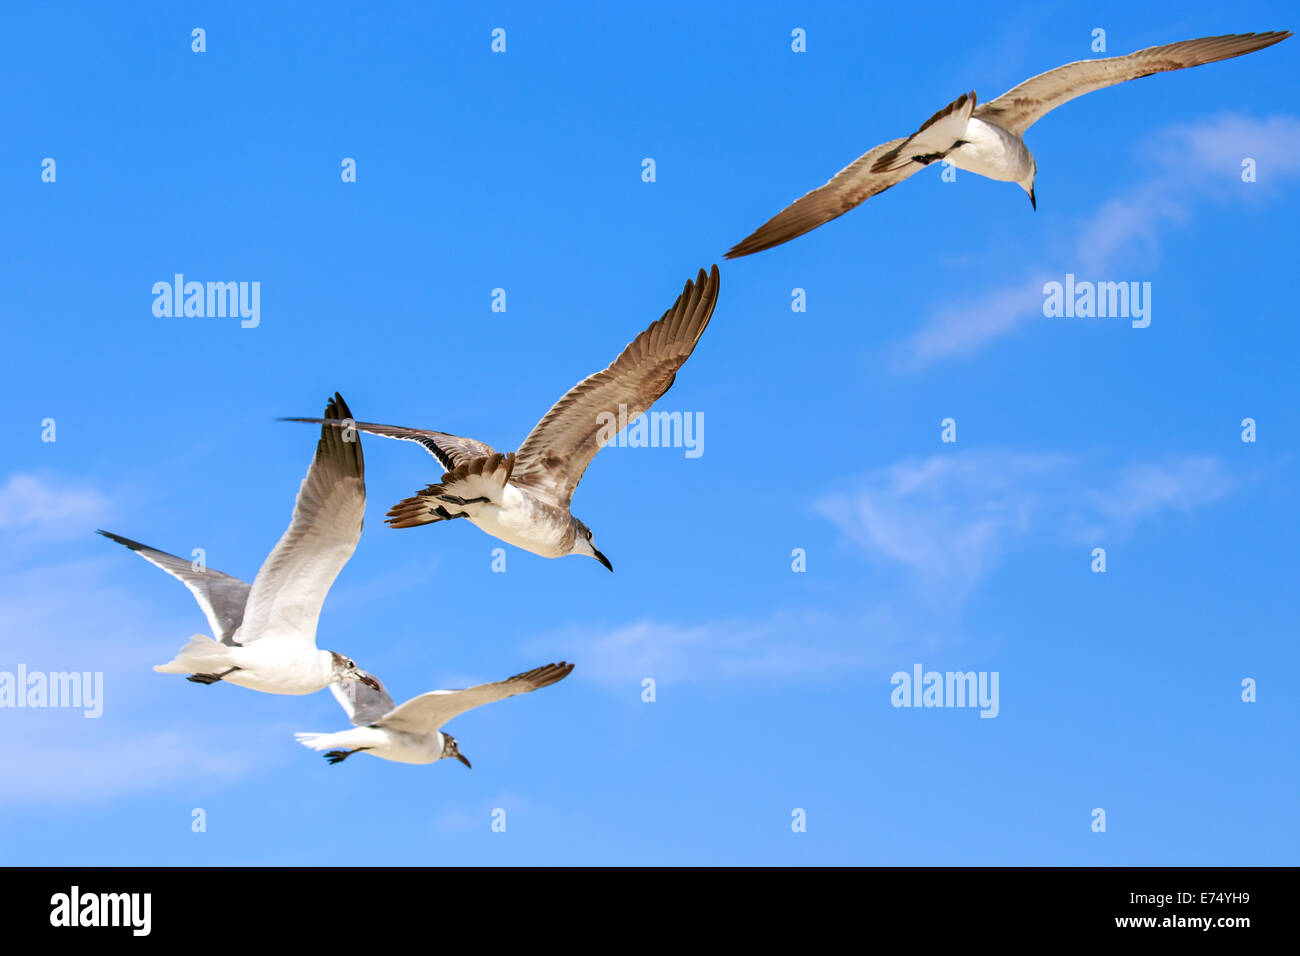 Seagulls flying high against the background of blue sky Stock Photo